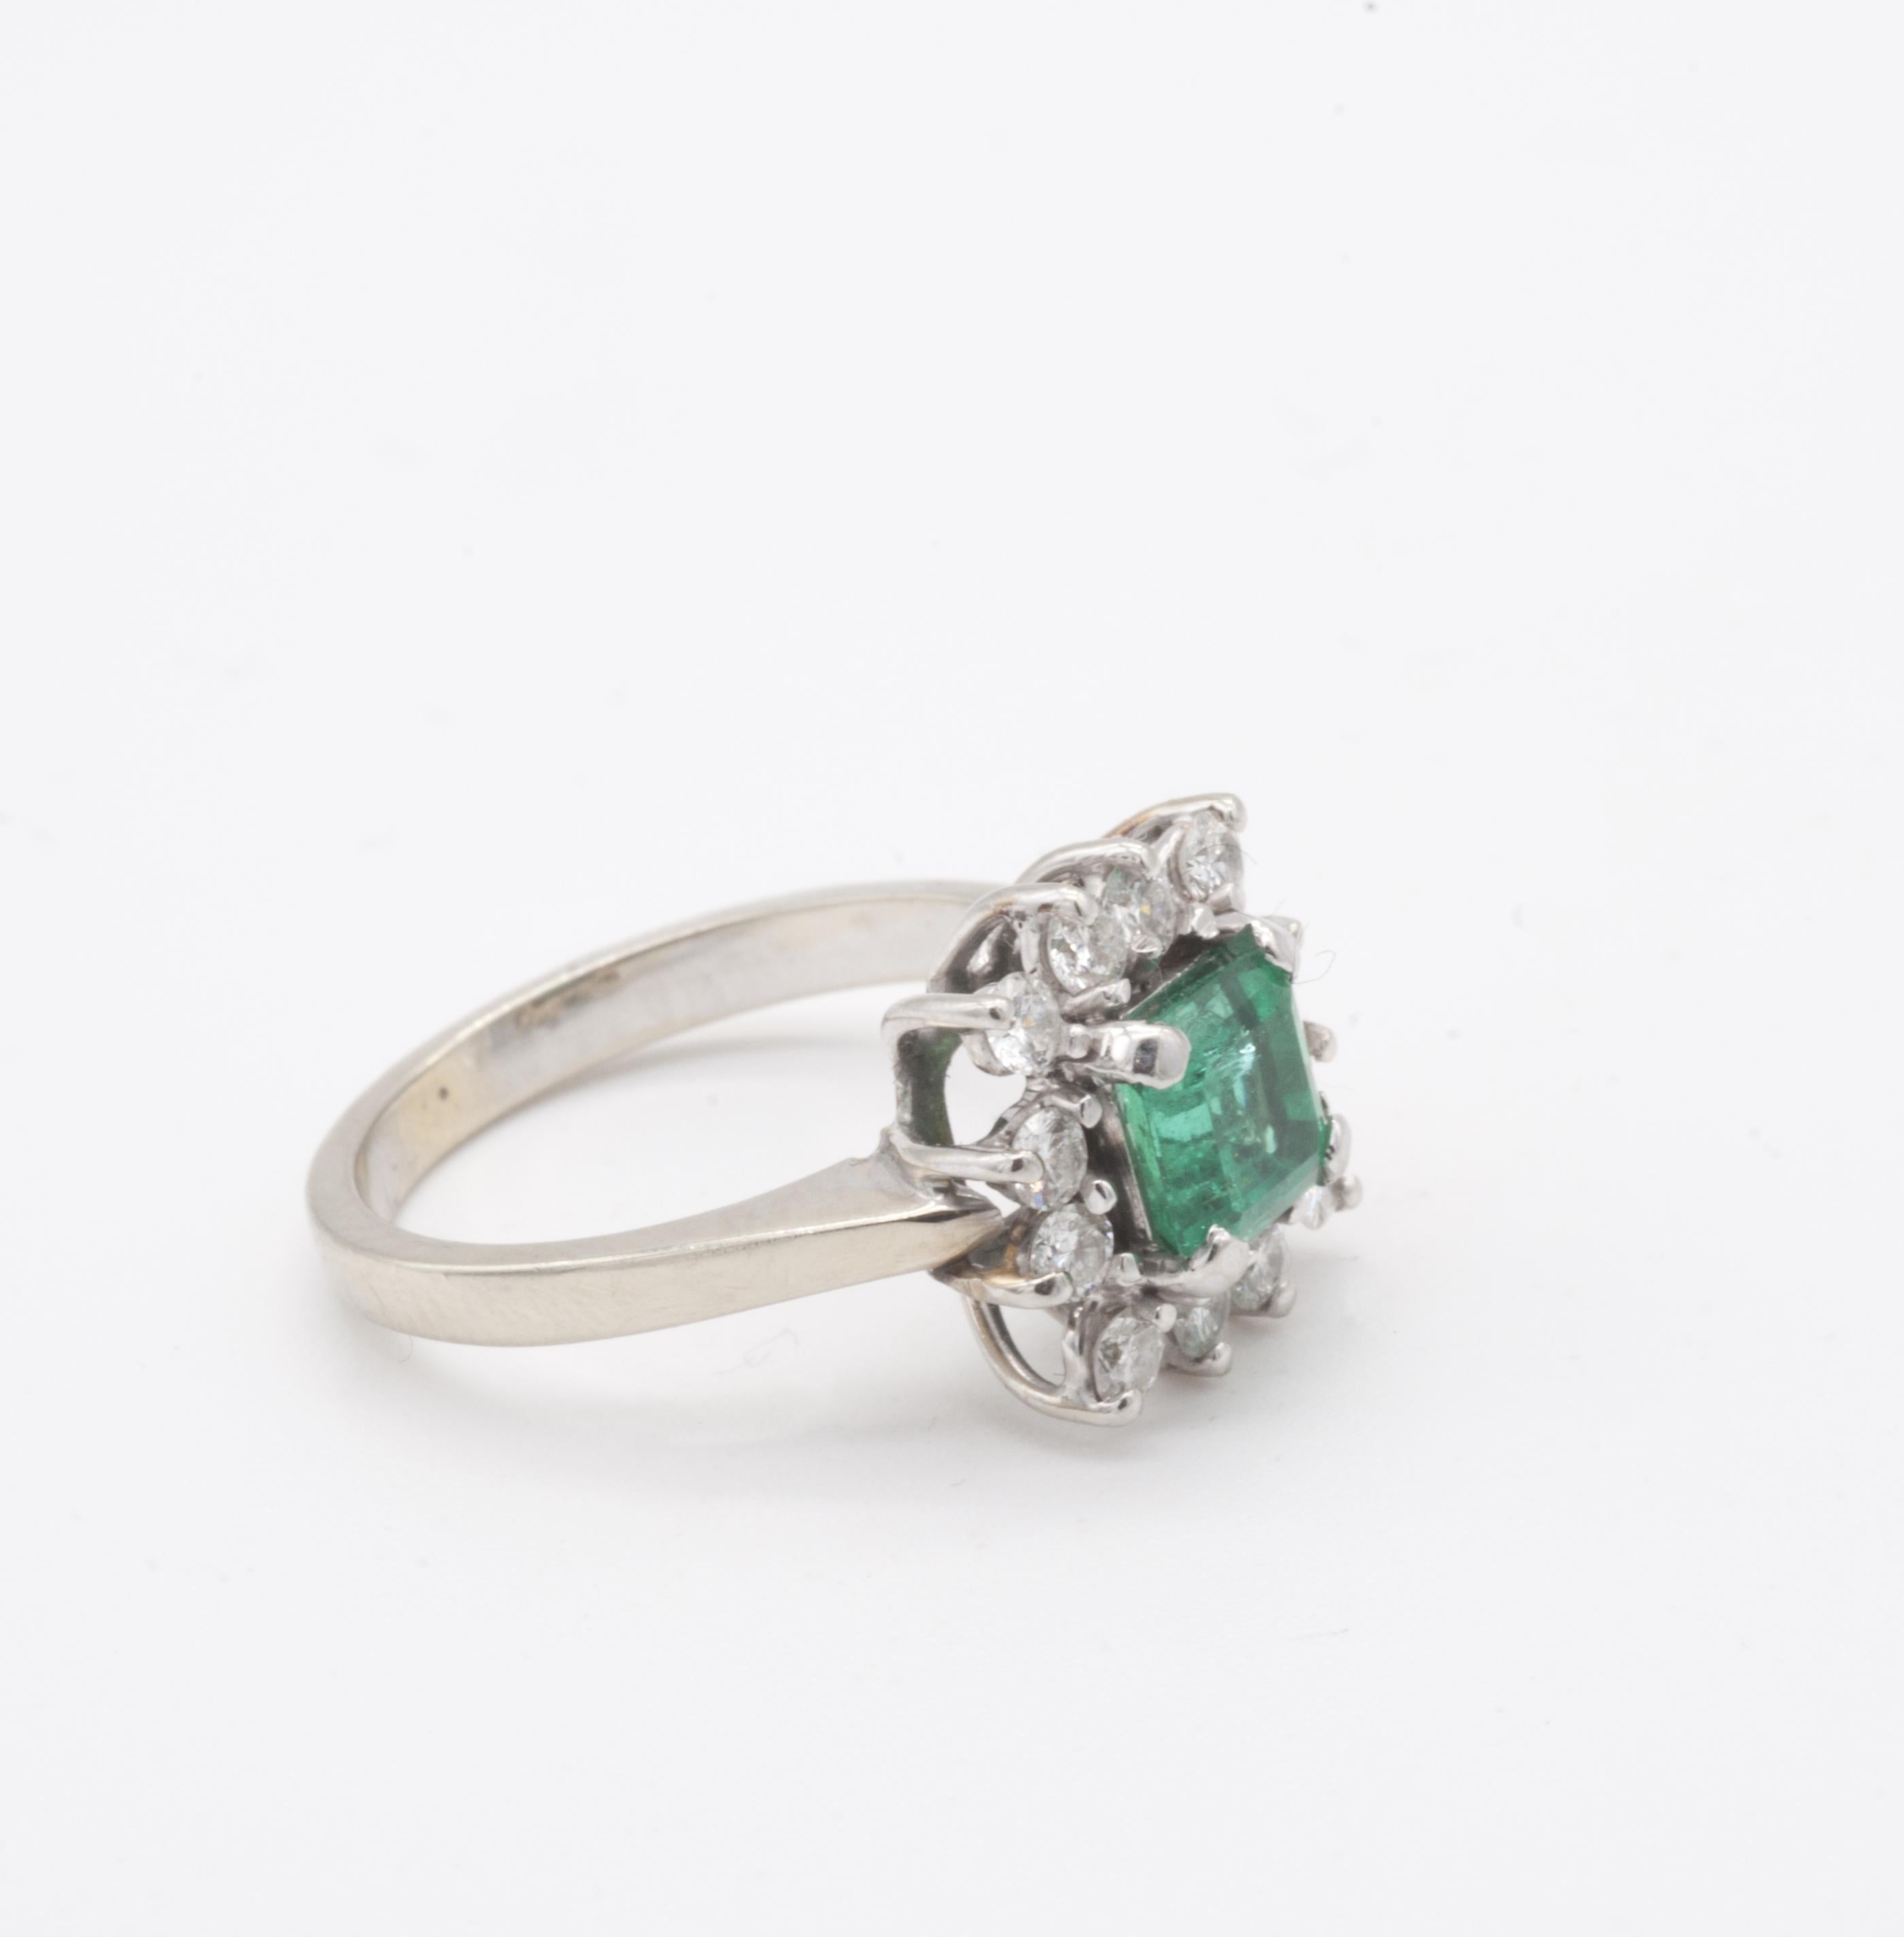 One stamped ladies Emerald and Diamond cocktail ring with approximately 1ct Emerald (6 x 6mm) and 12 brilliant diamonds. 